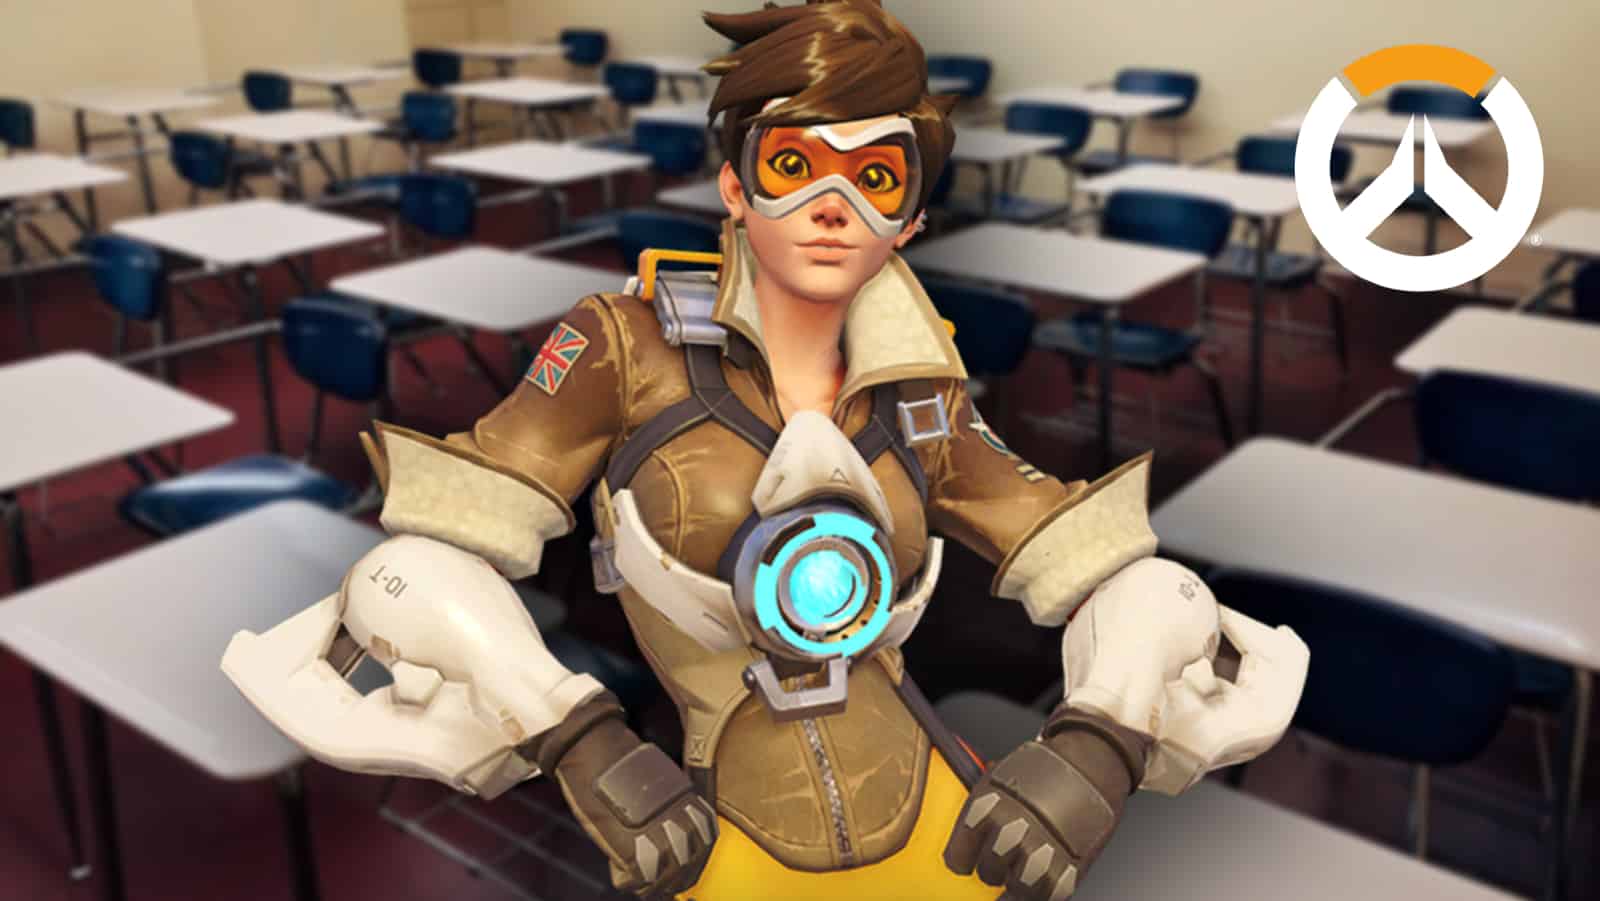 Adorable Overwatch skin concept turns Tracer into Japanese school